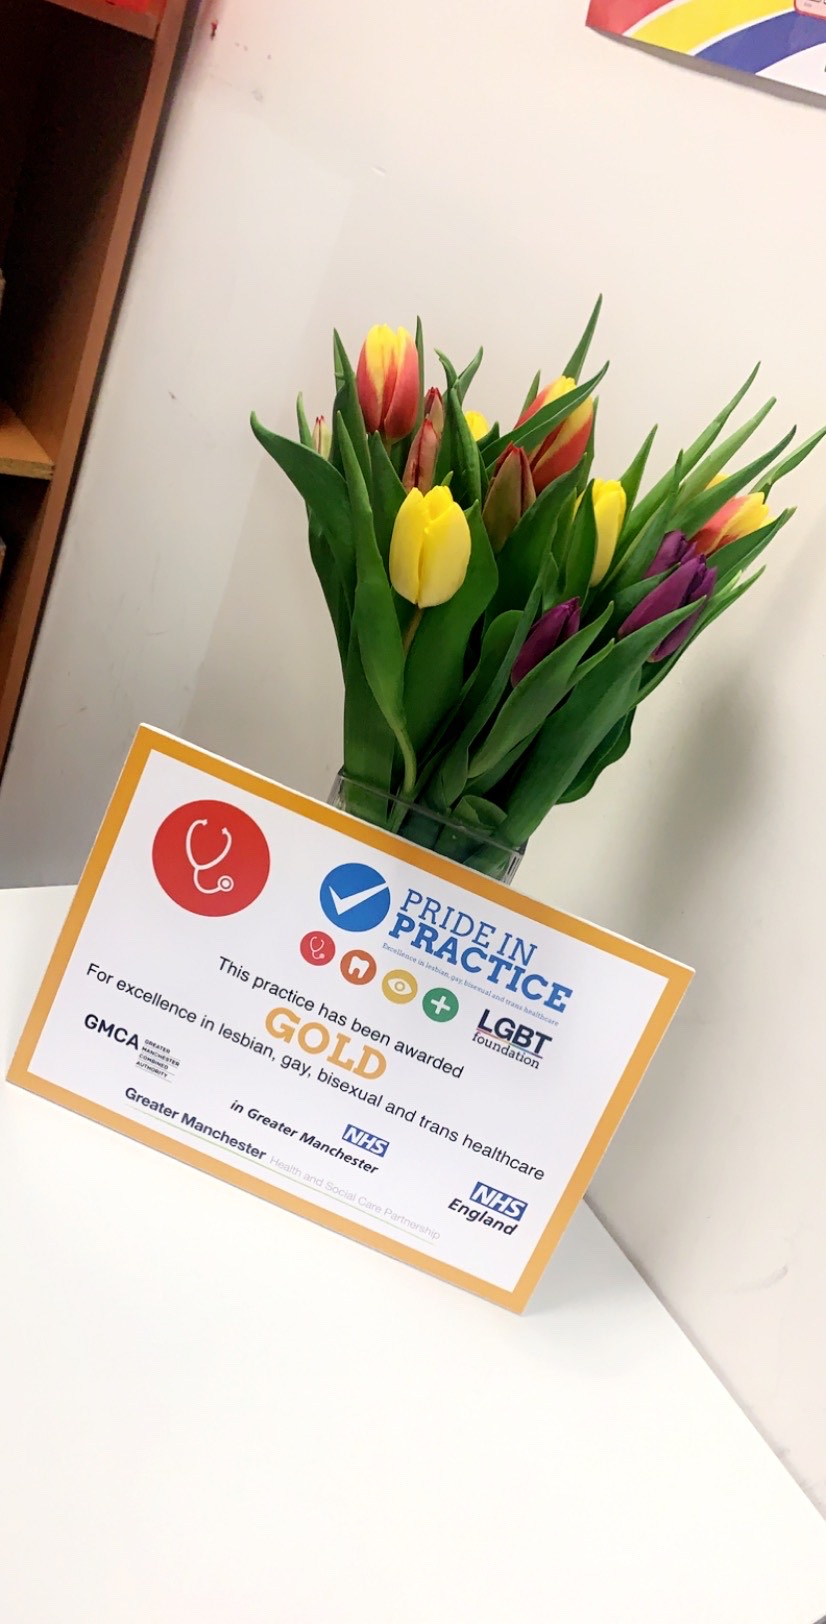 The certificate for the gold award in front of a vase of tulips